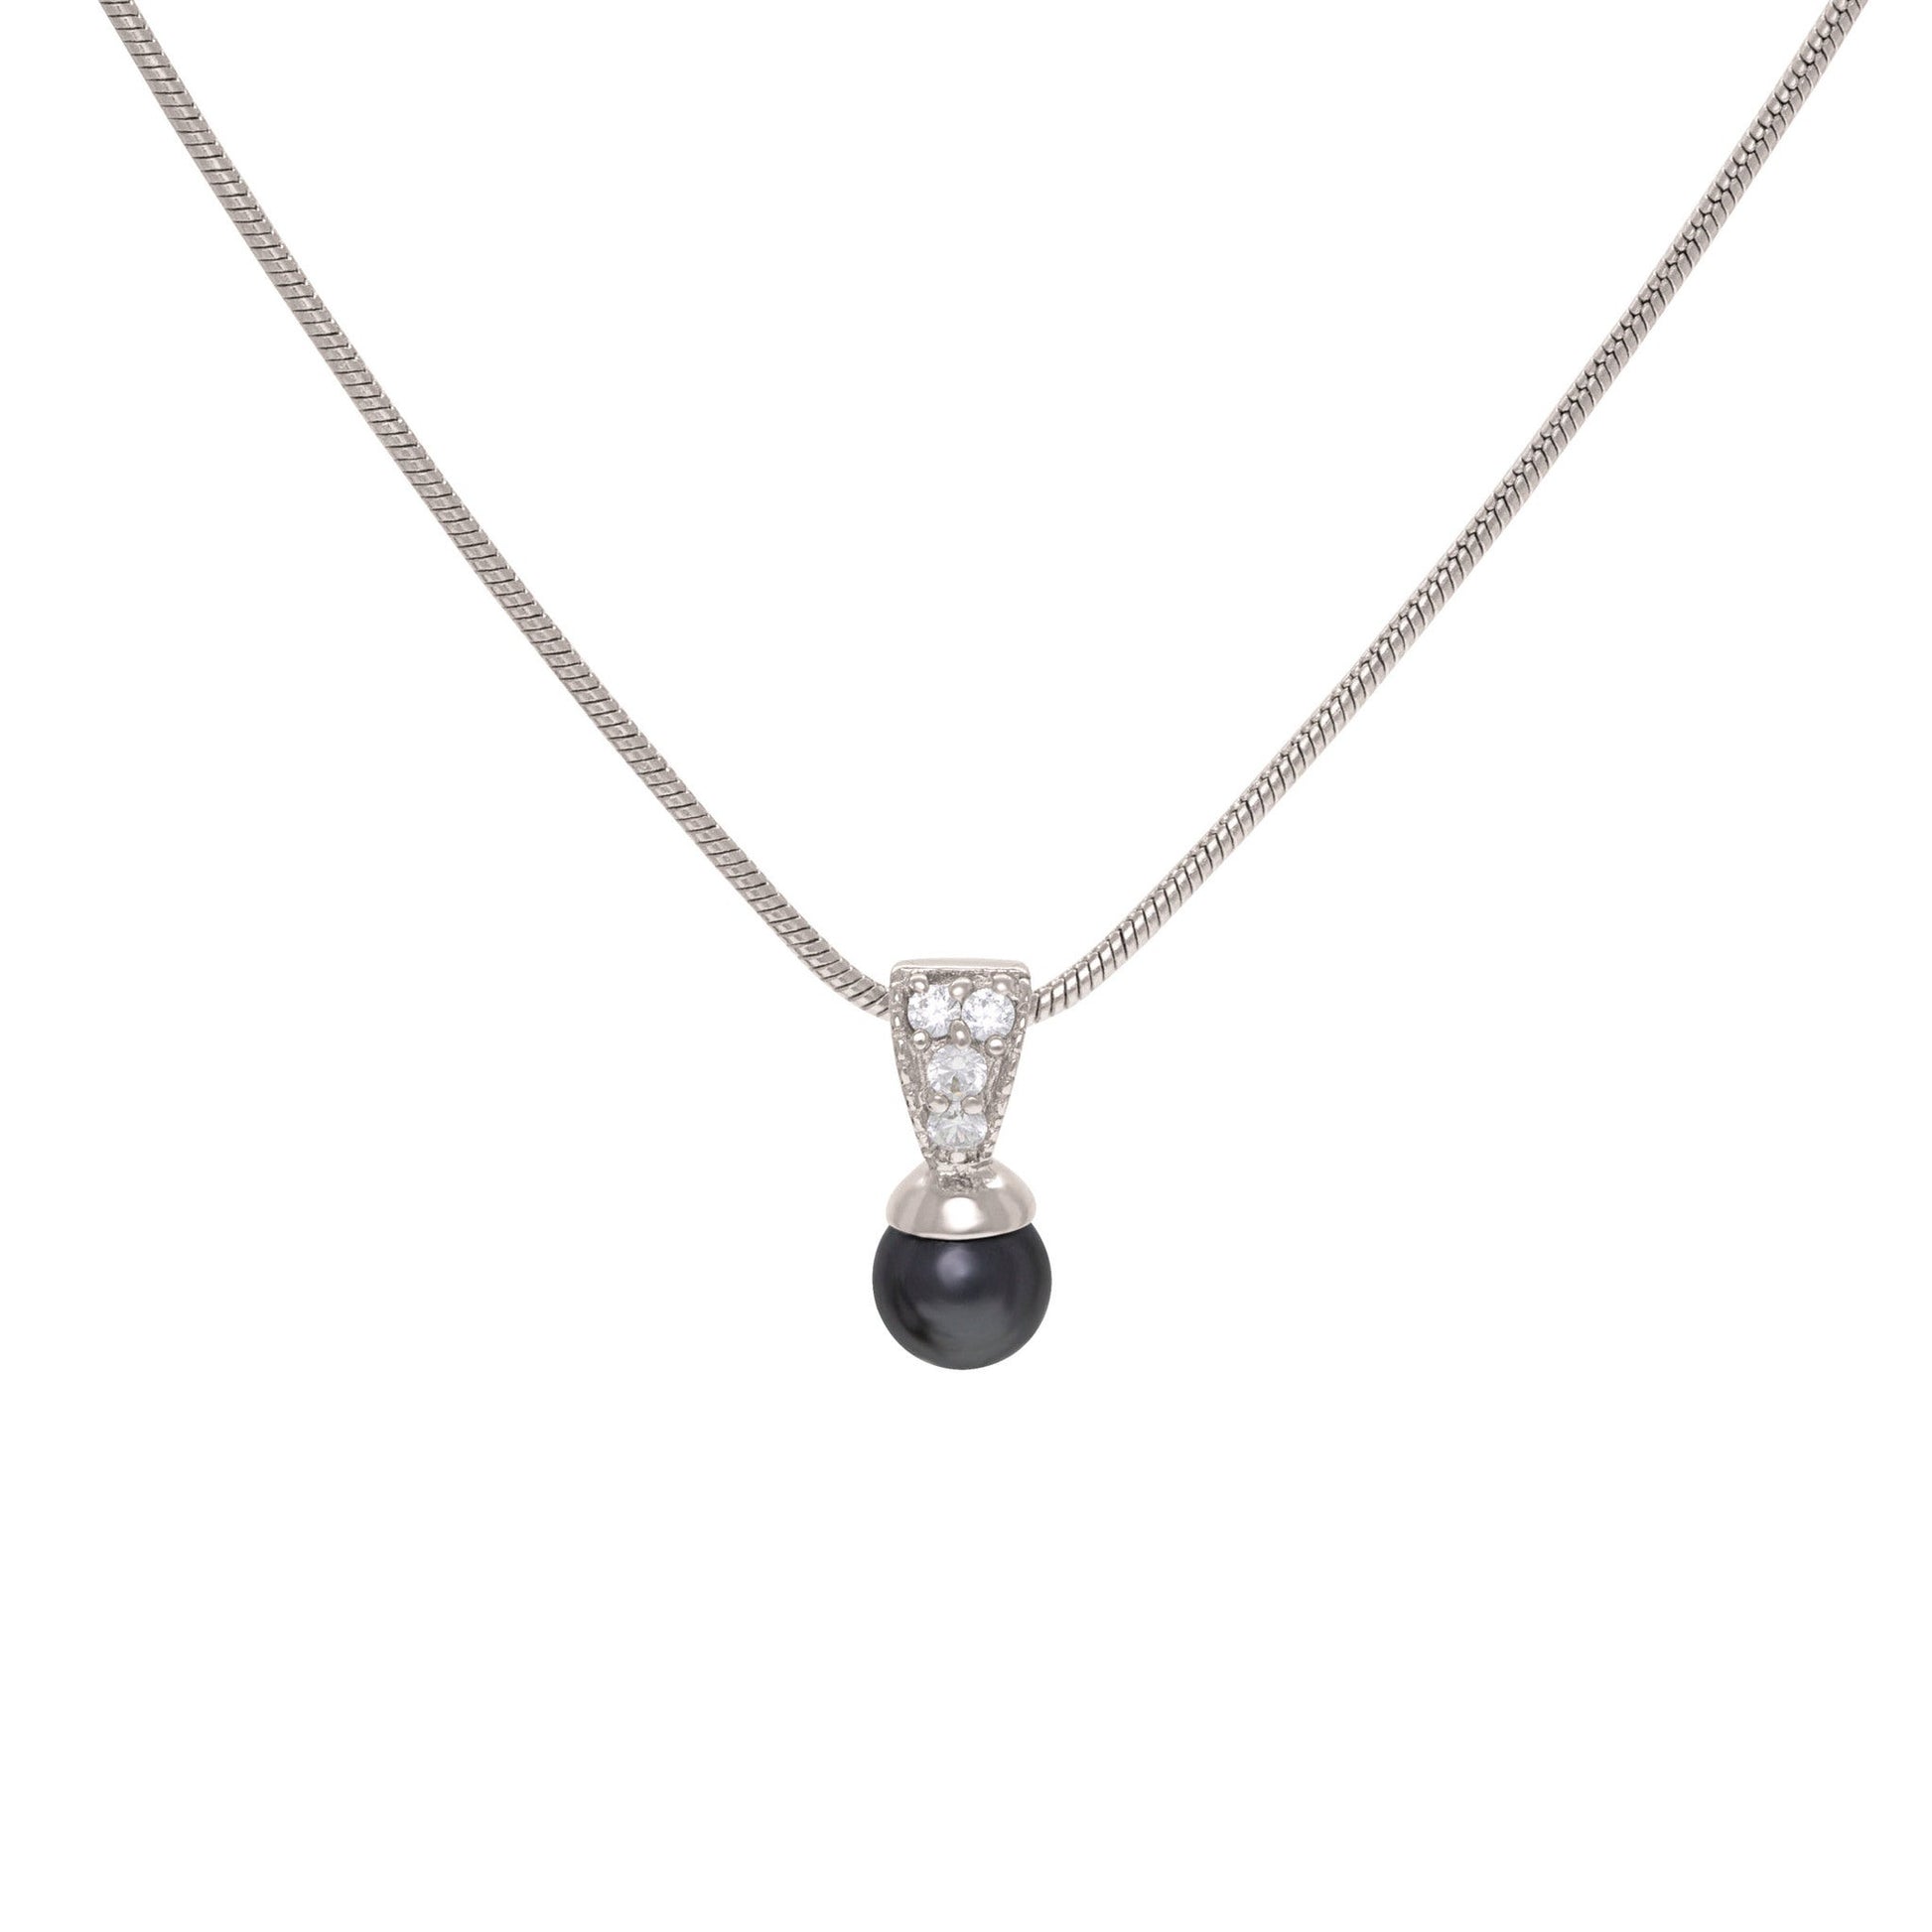 A black glass pearl simulated diamond pendant displayed on a neutral white background.